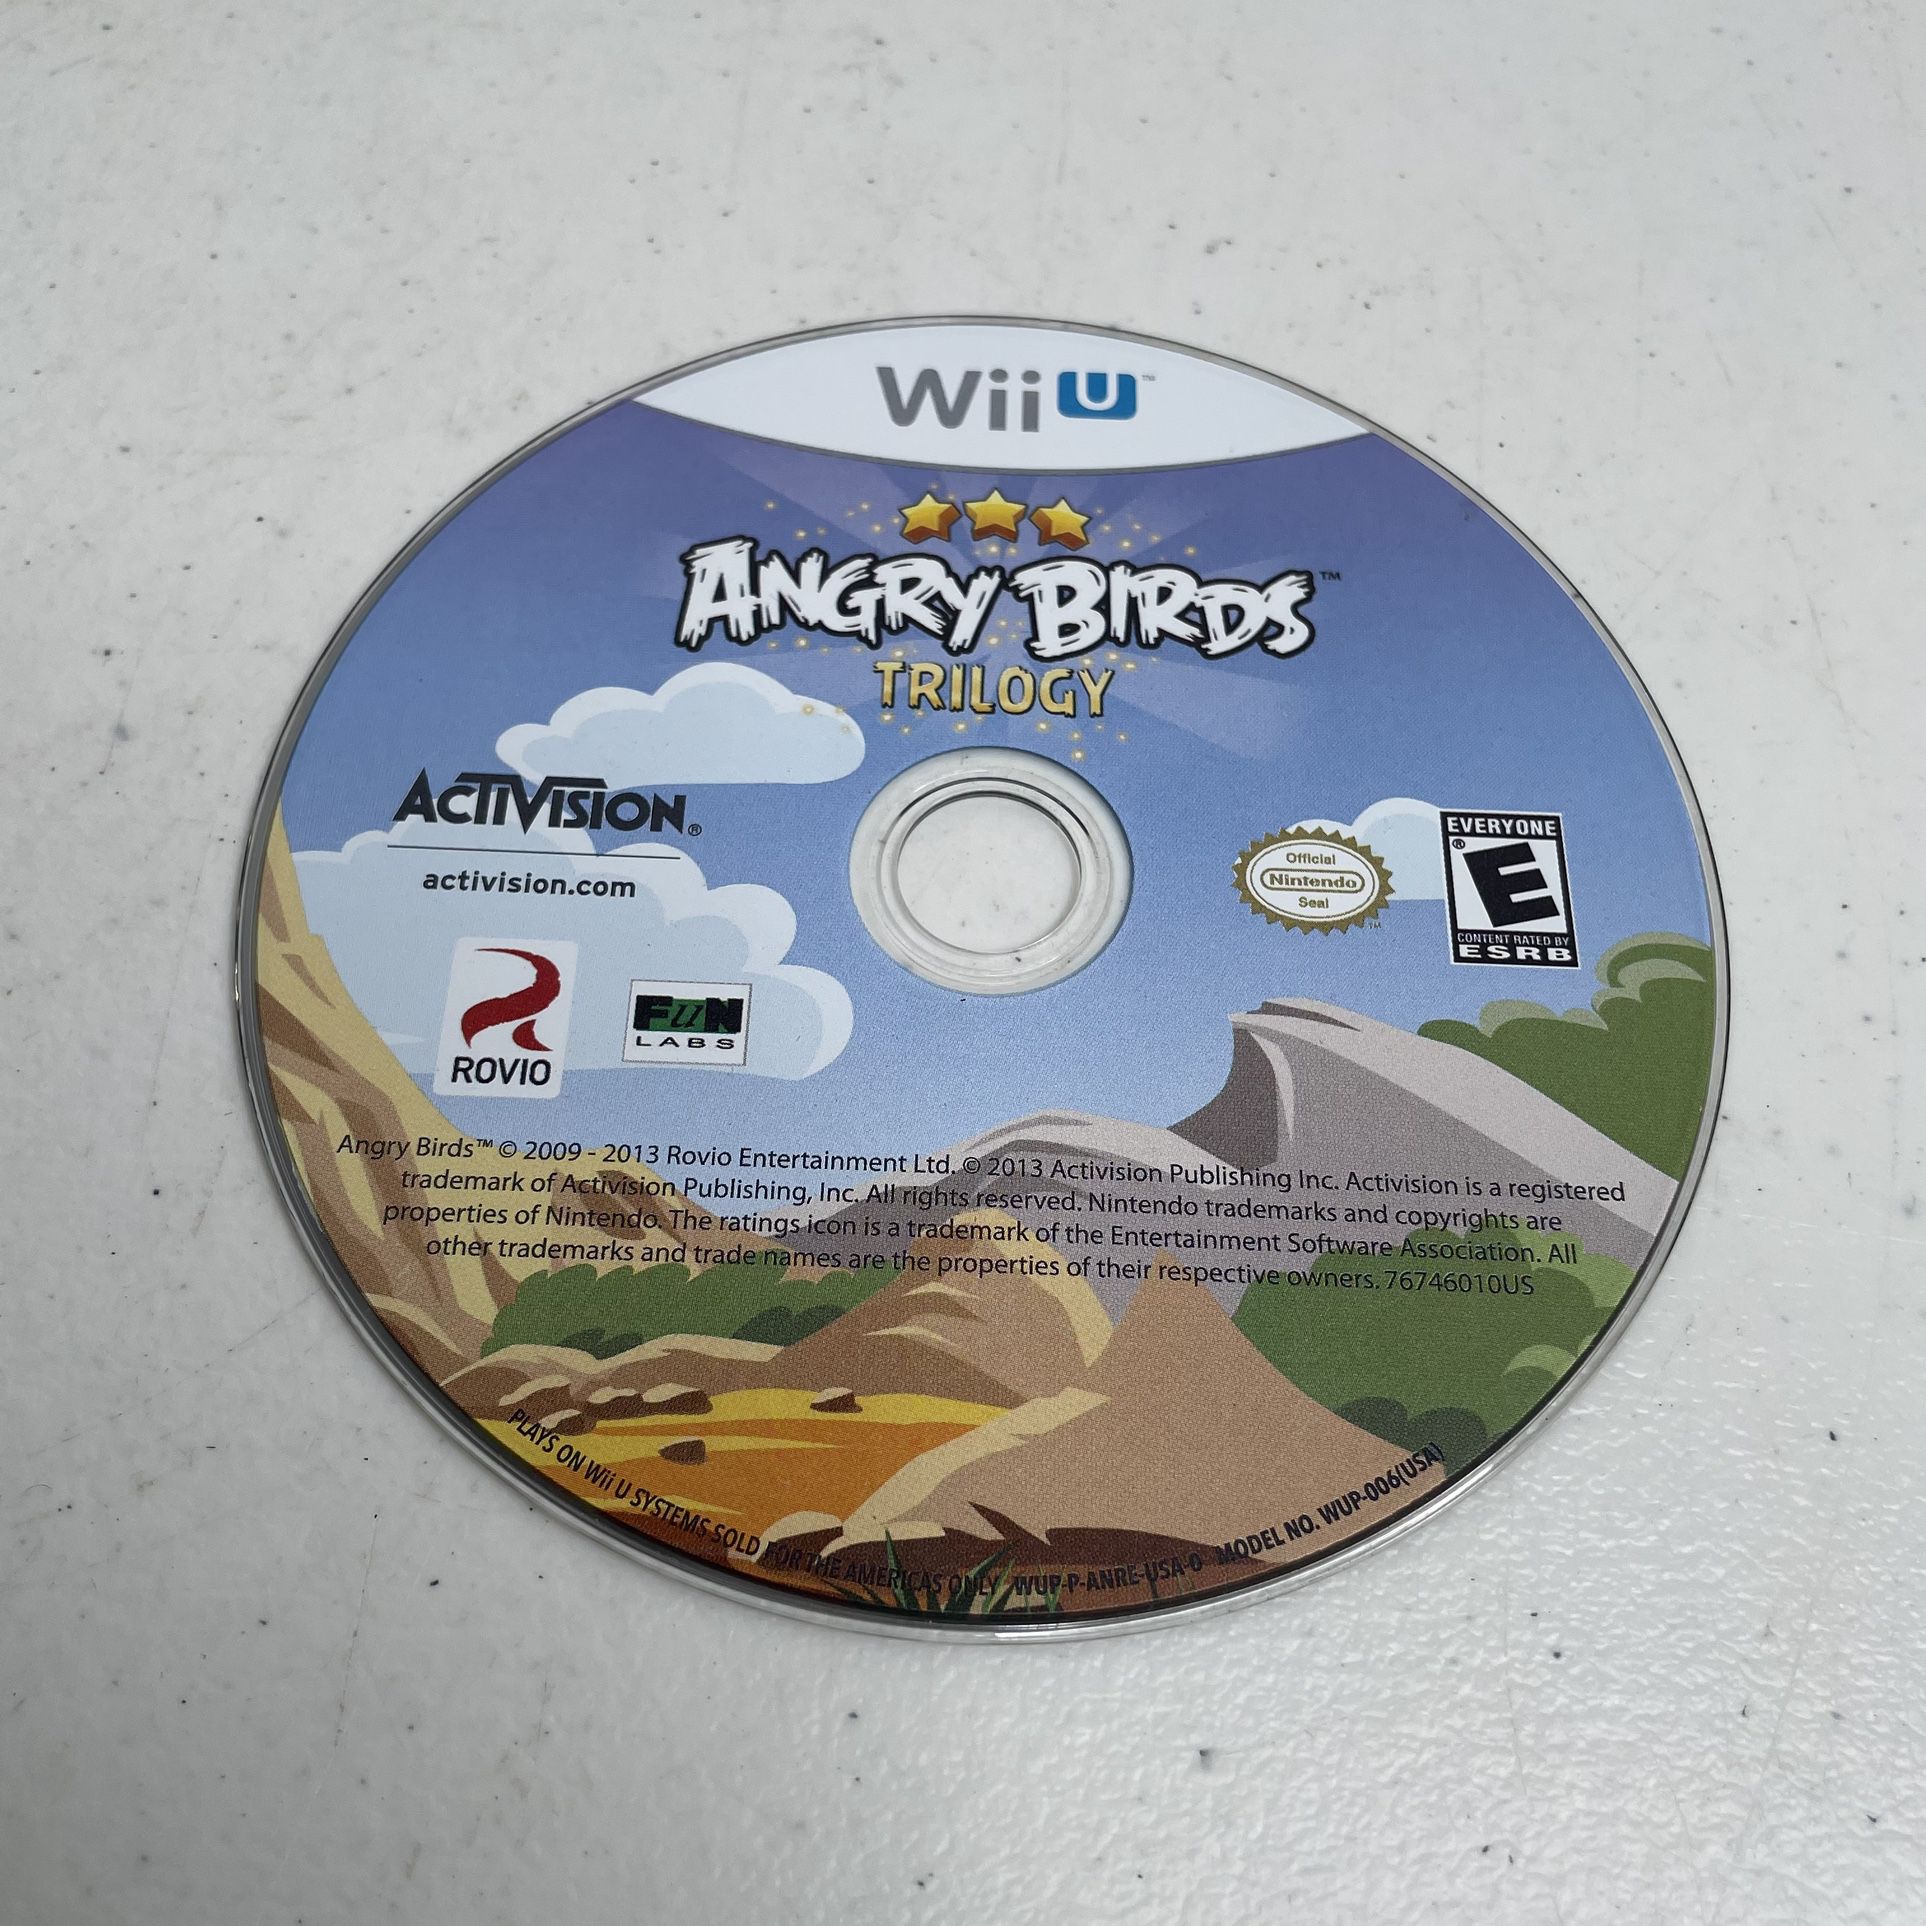 Angry Birds Trilogy Wii U Game